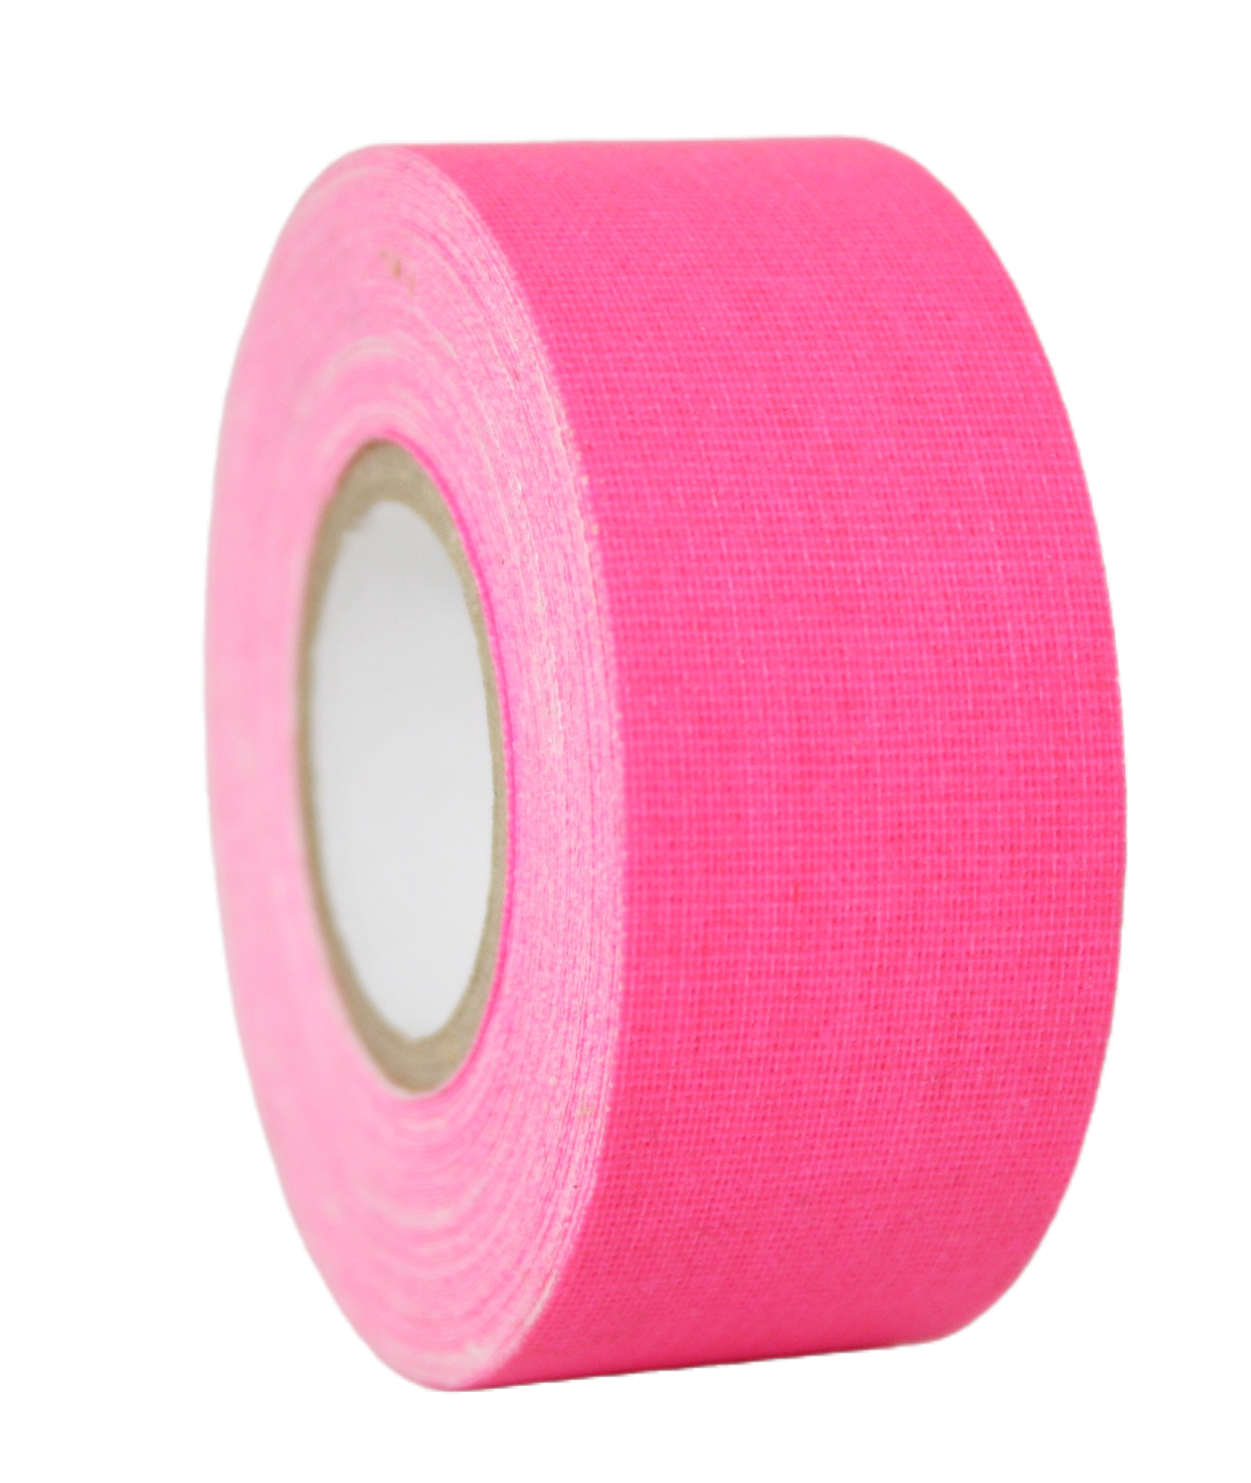 A close up of a single roll of fluorescent pink Micro Gaffer 1" tape